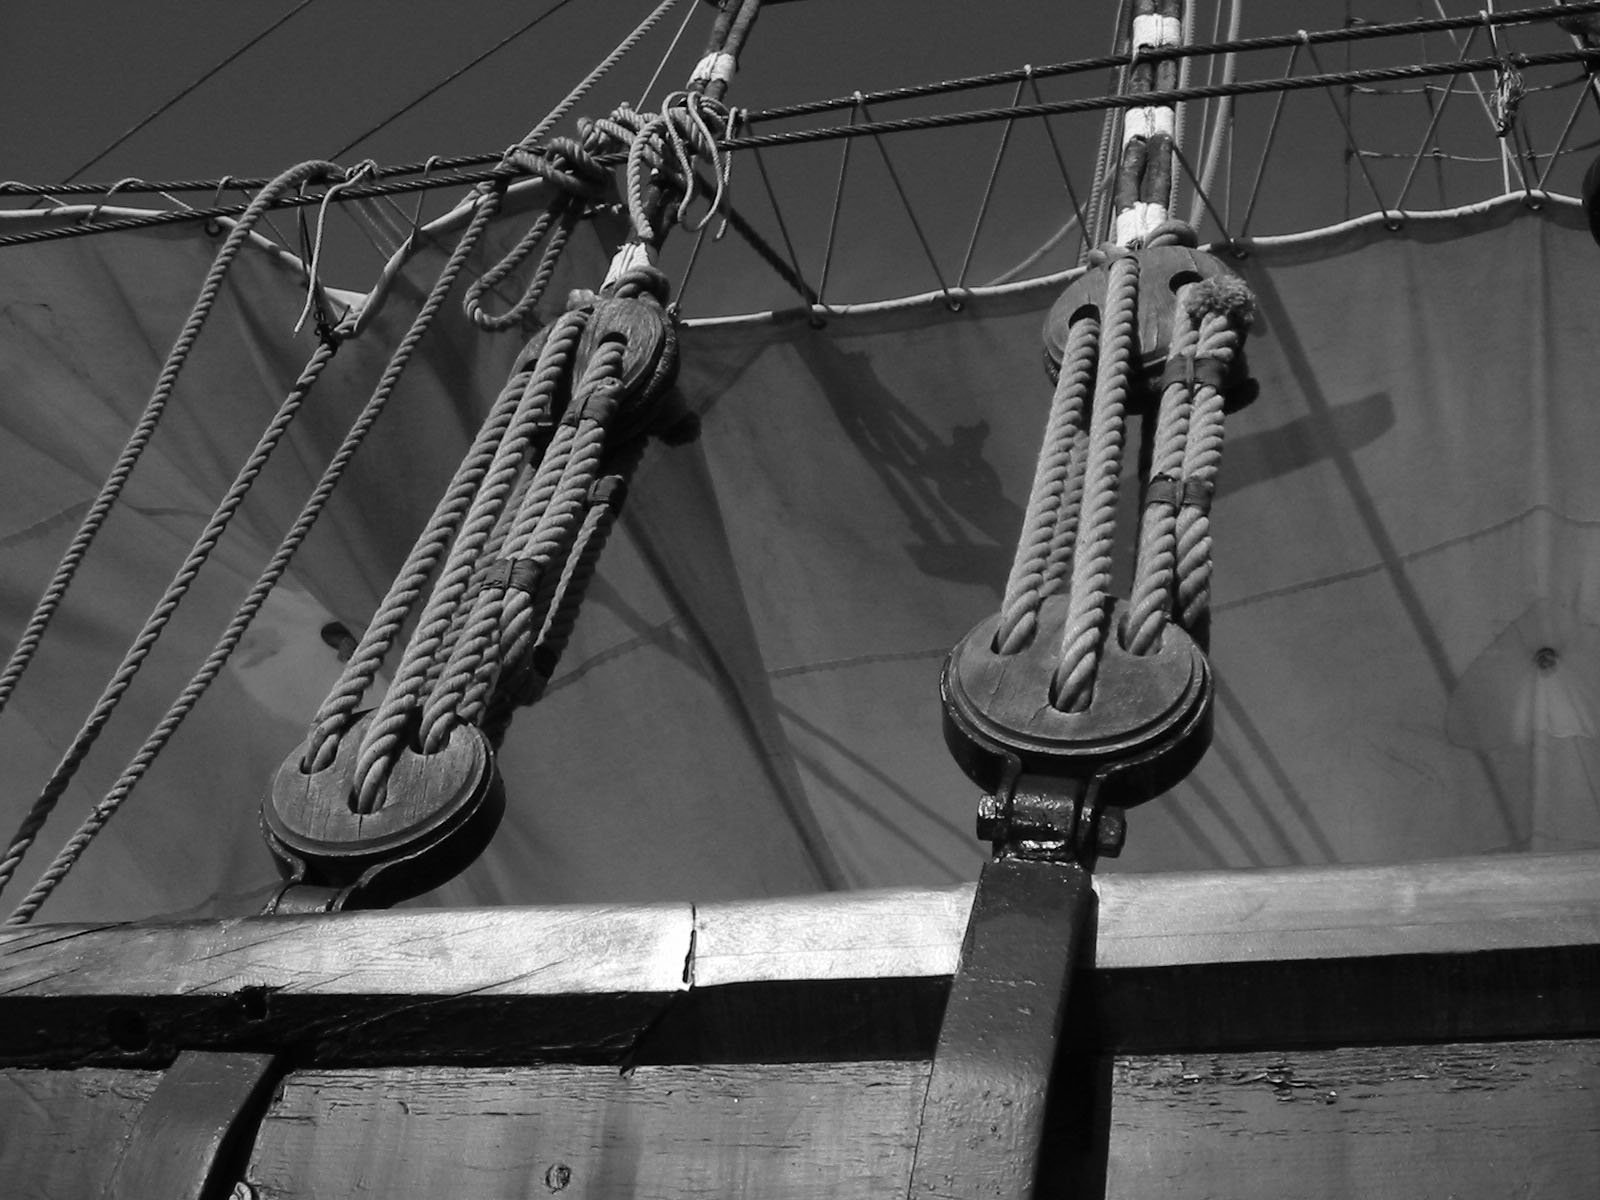 ropes and wires on top of an old sailboat